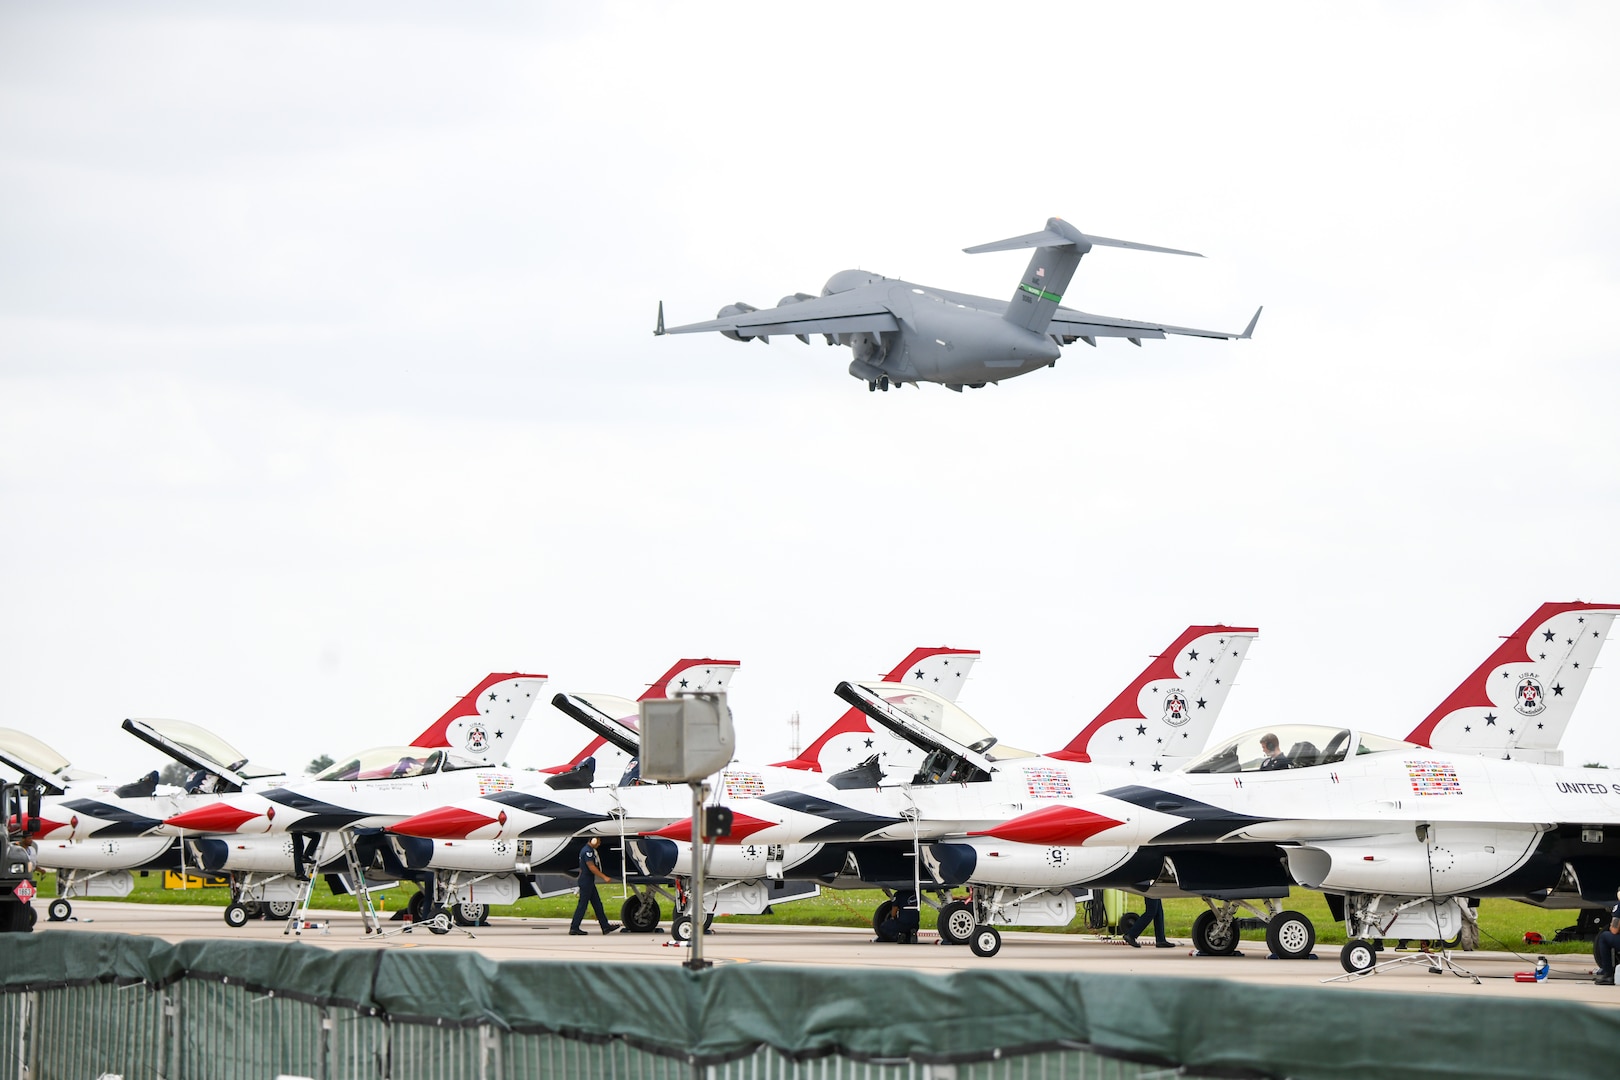 aircraft taking off in the background over fighter jets in the foreground